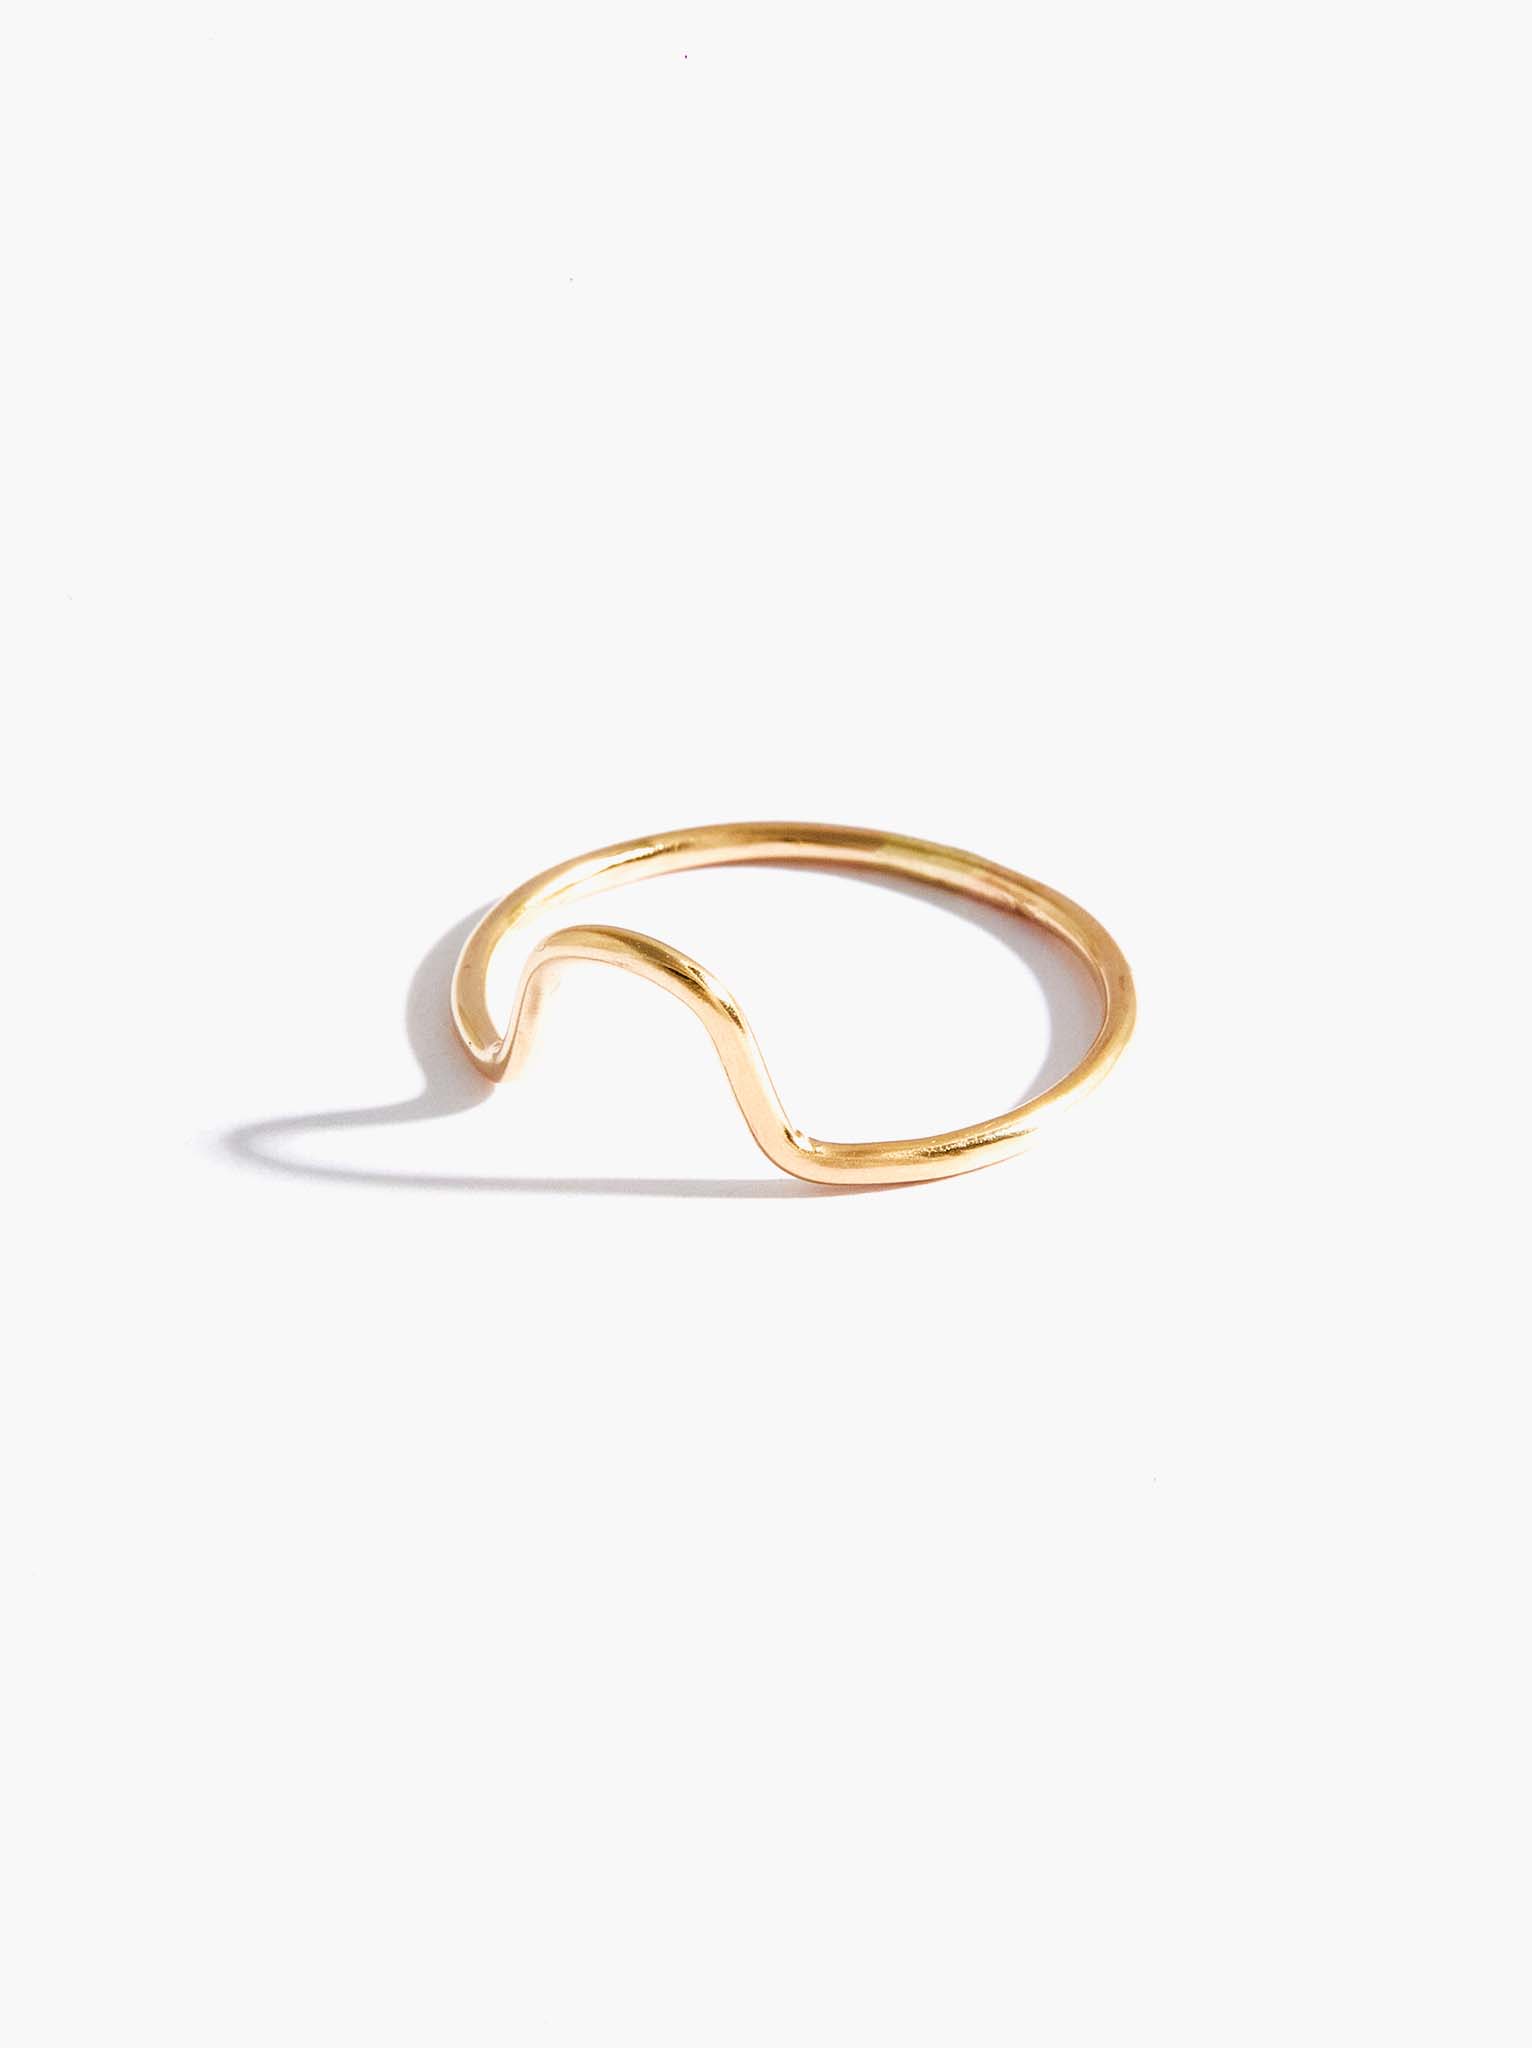 ABLE Arch Ring - Gold Filled